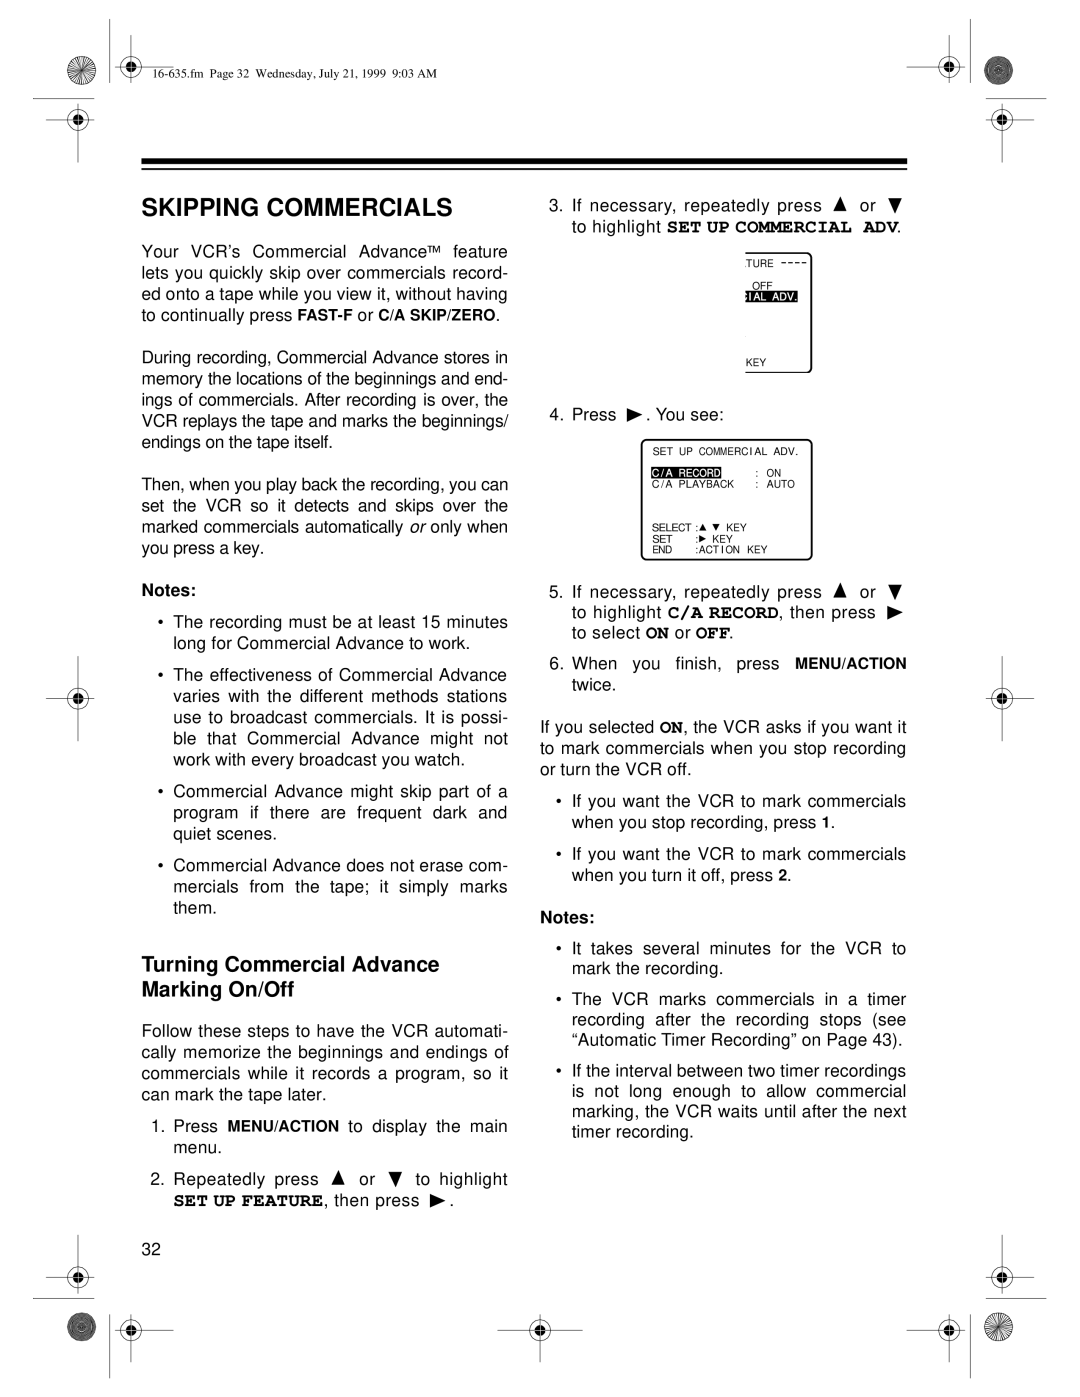 Radio Shack 66 owner manual Skipping Commercials, Turning Commercial Advance Marking On/Off 